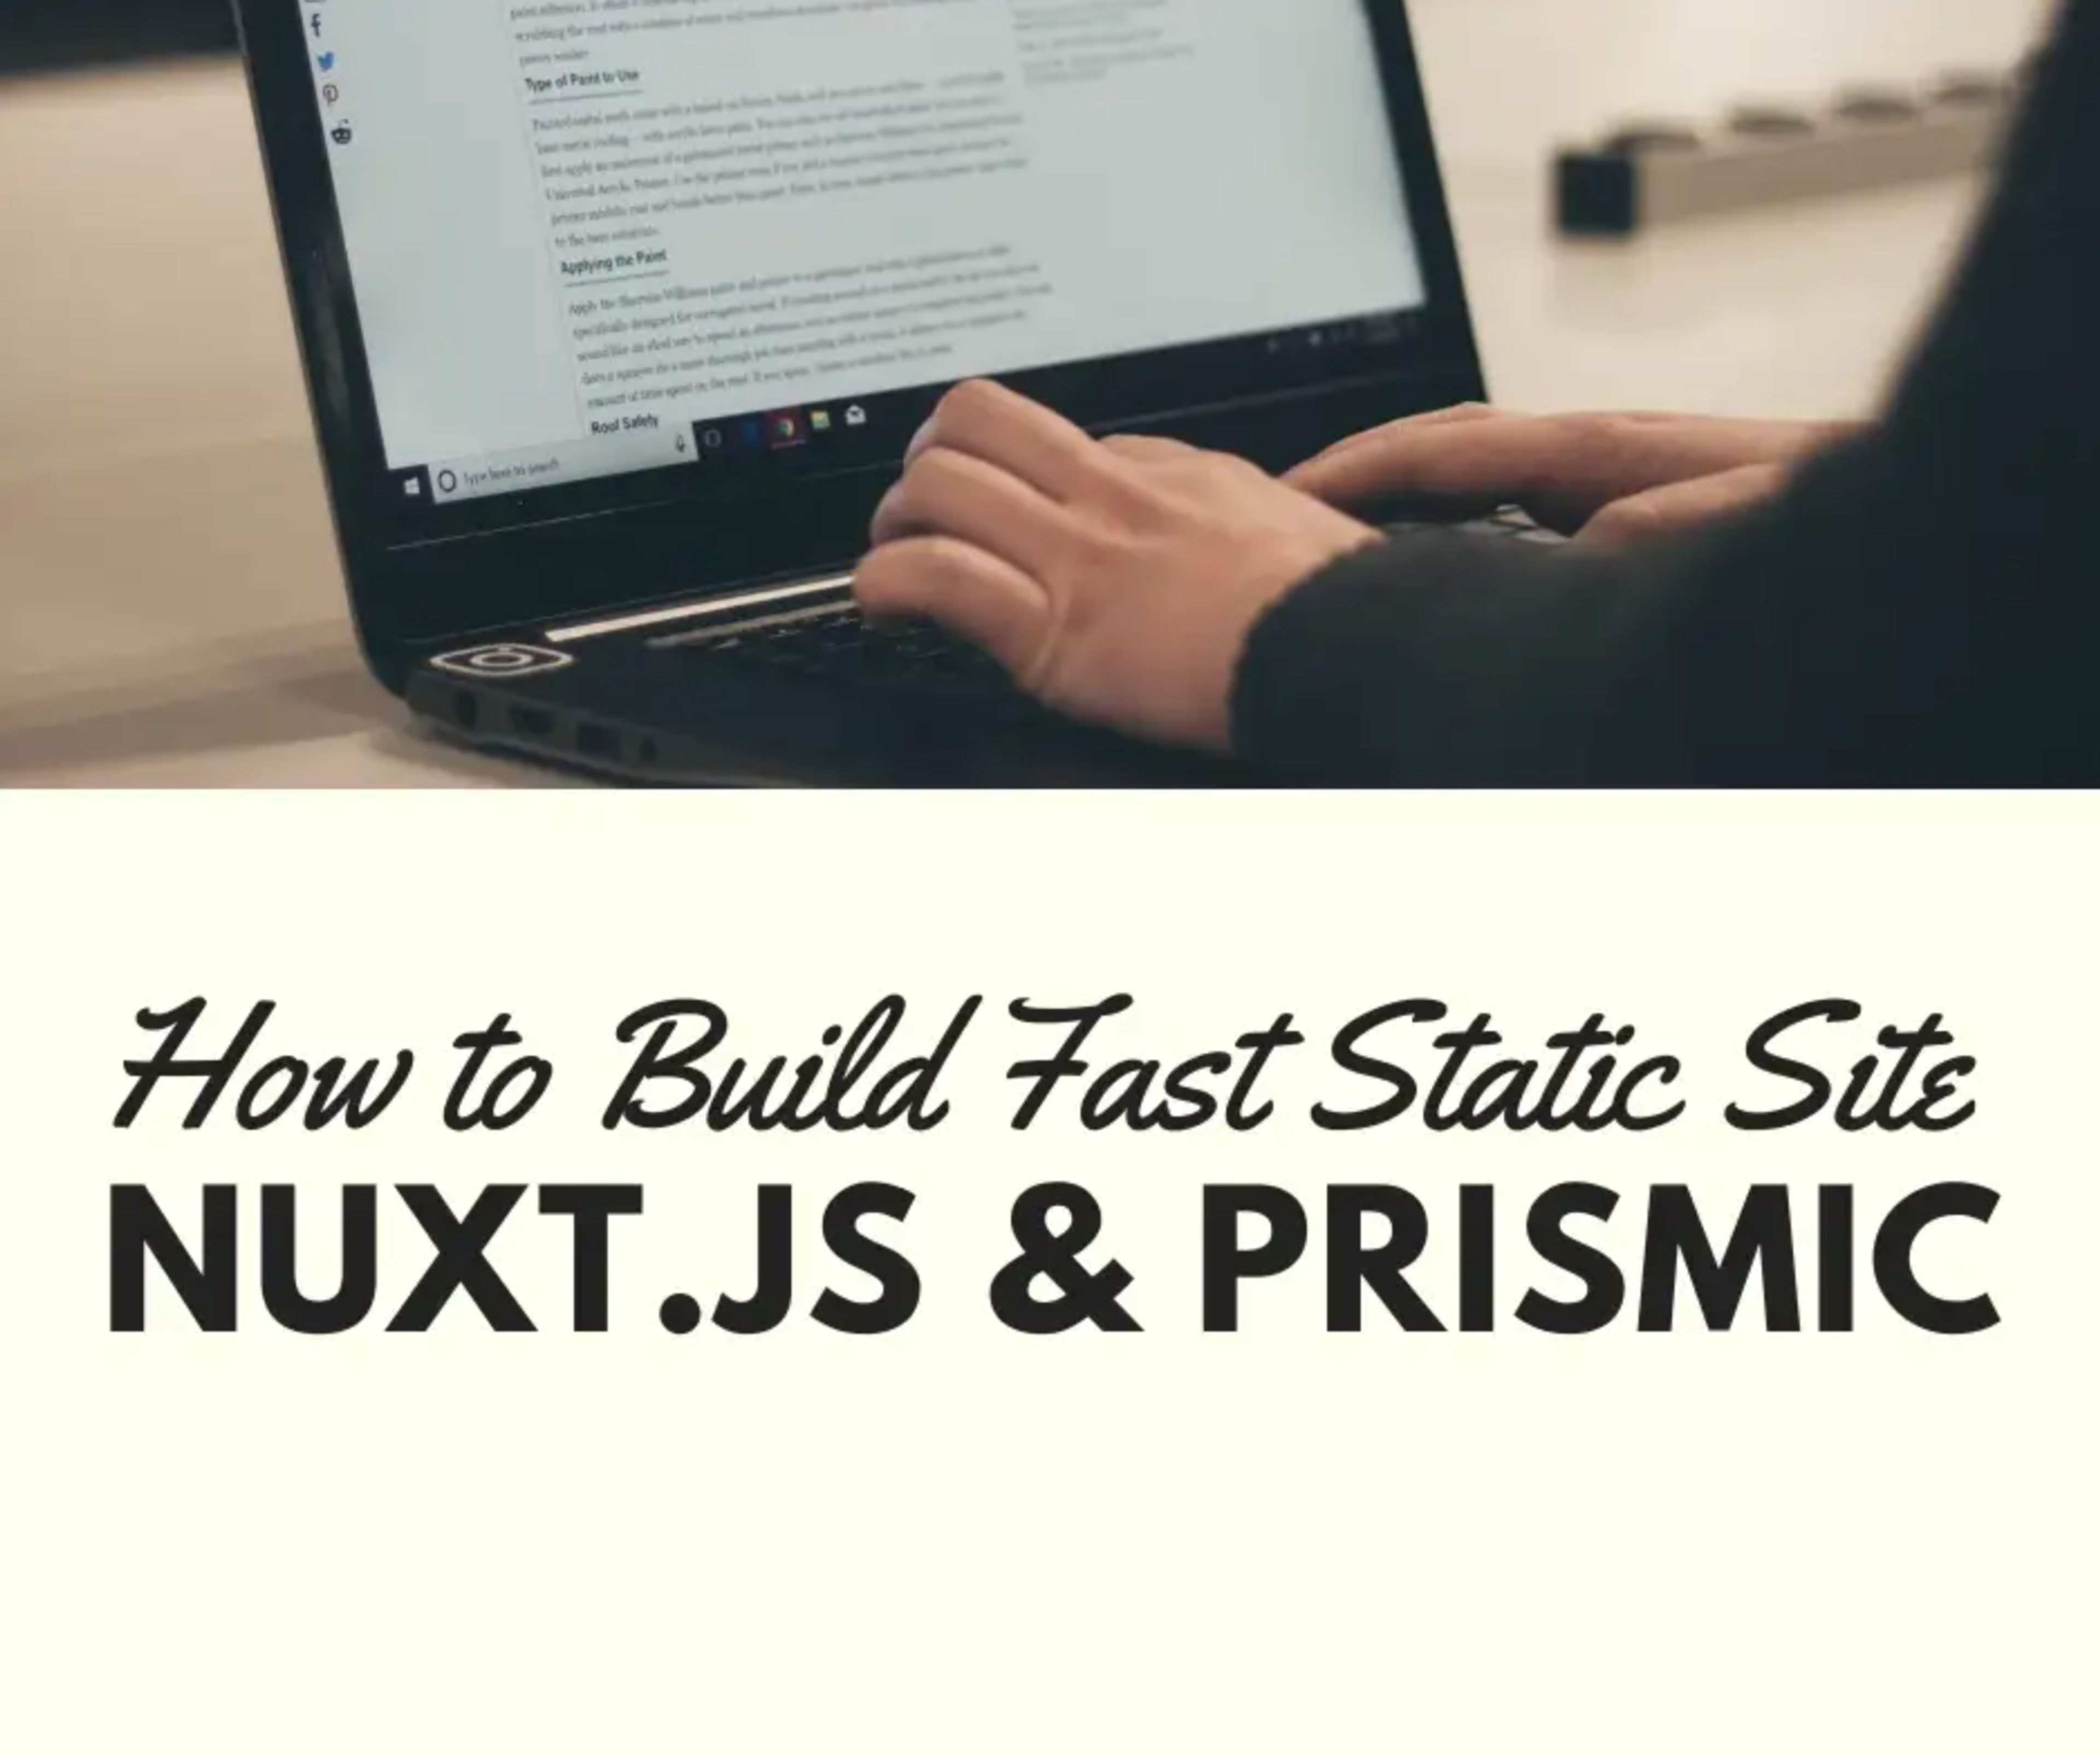 How to Build Fast Static Site with Nuxt.JS and Prismic